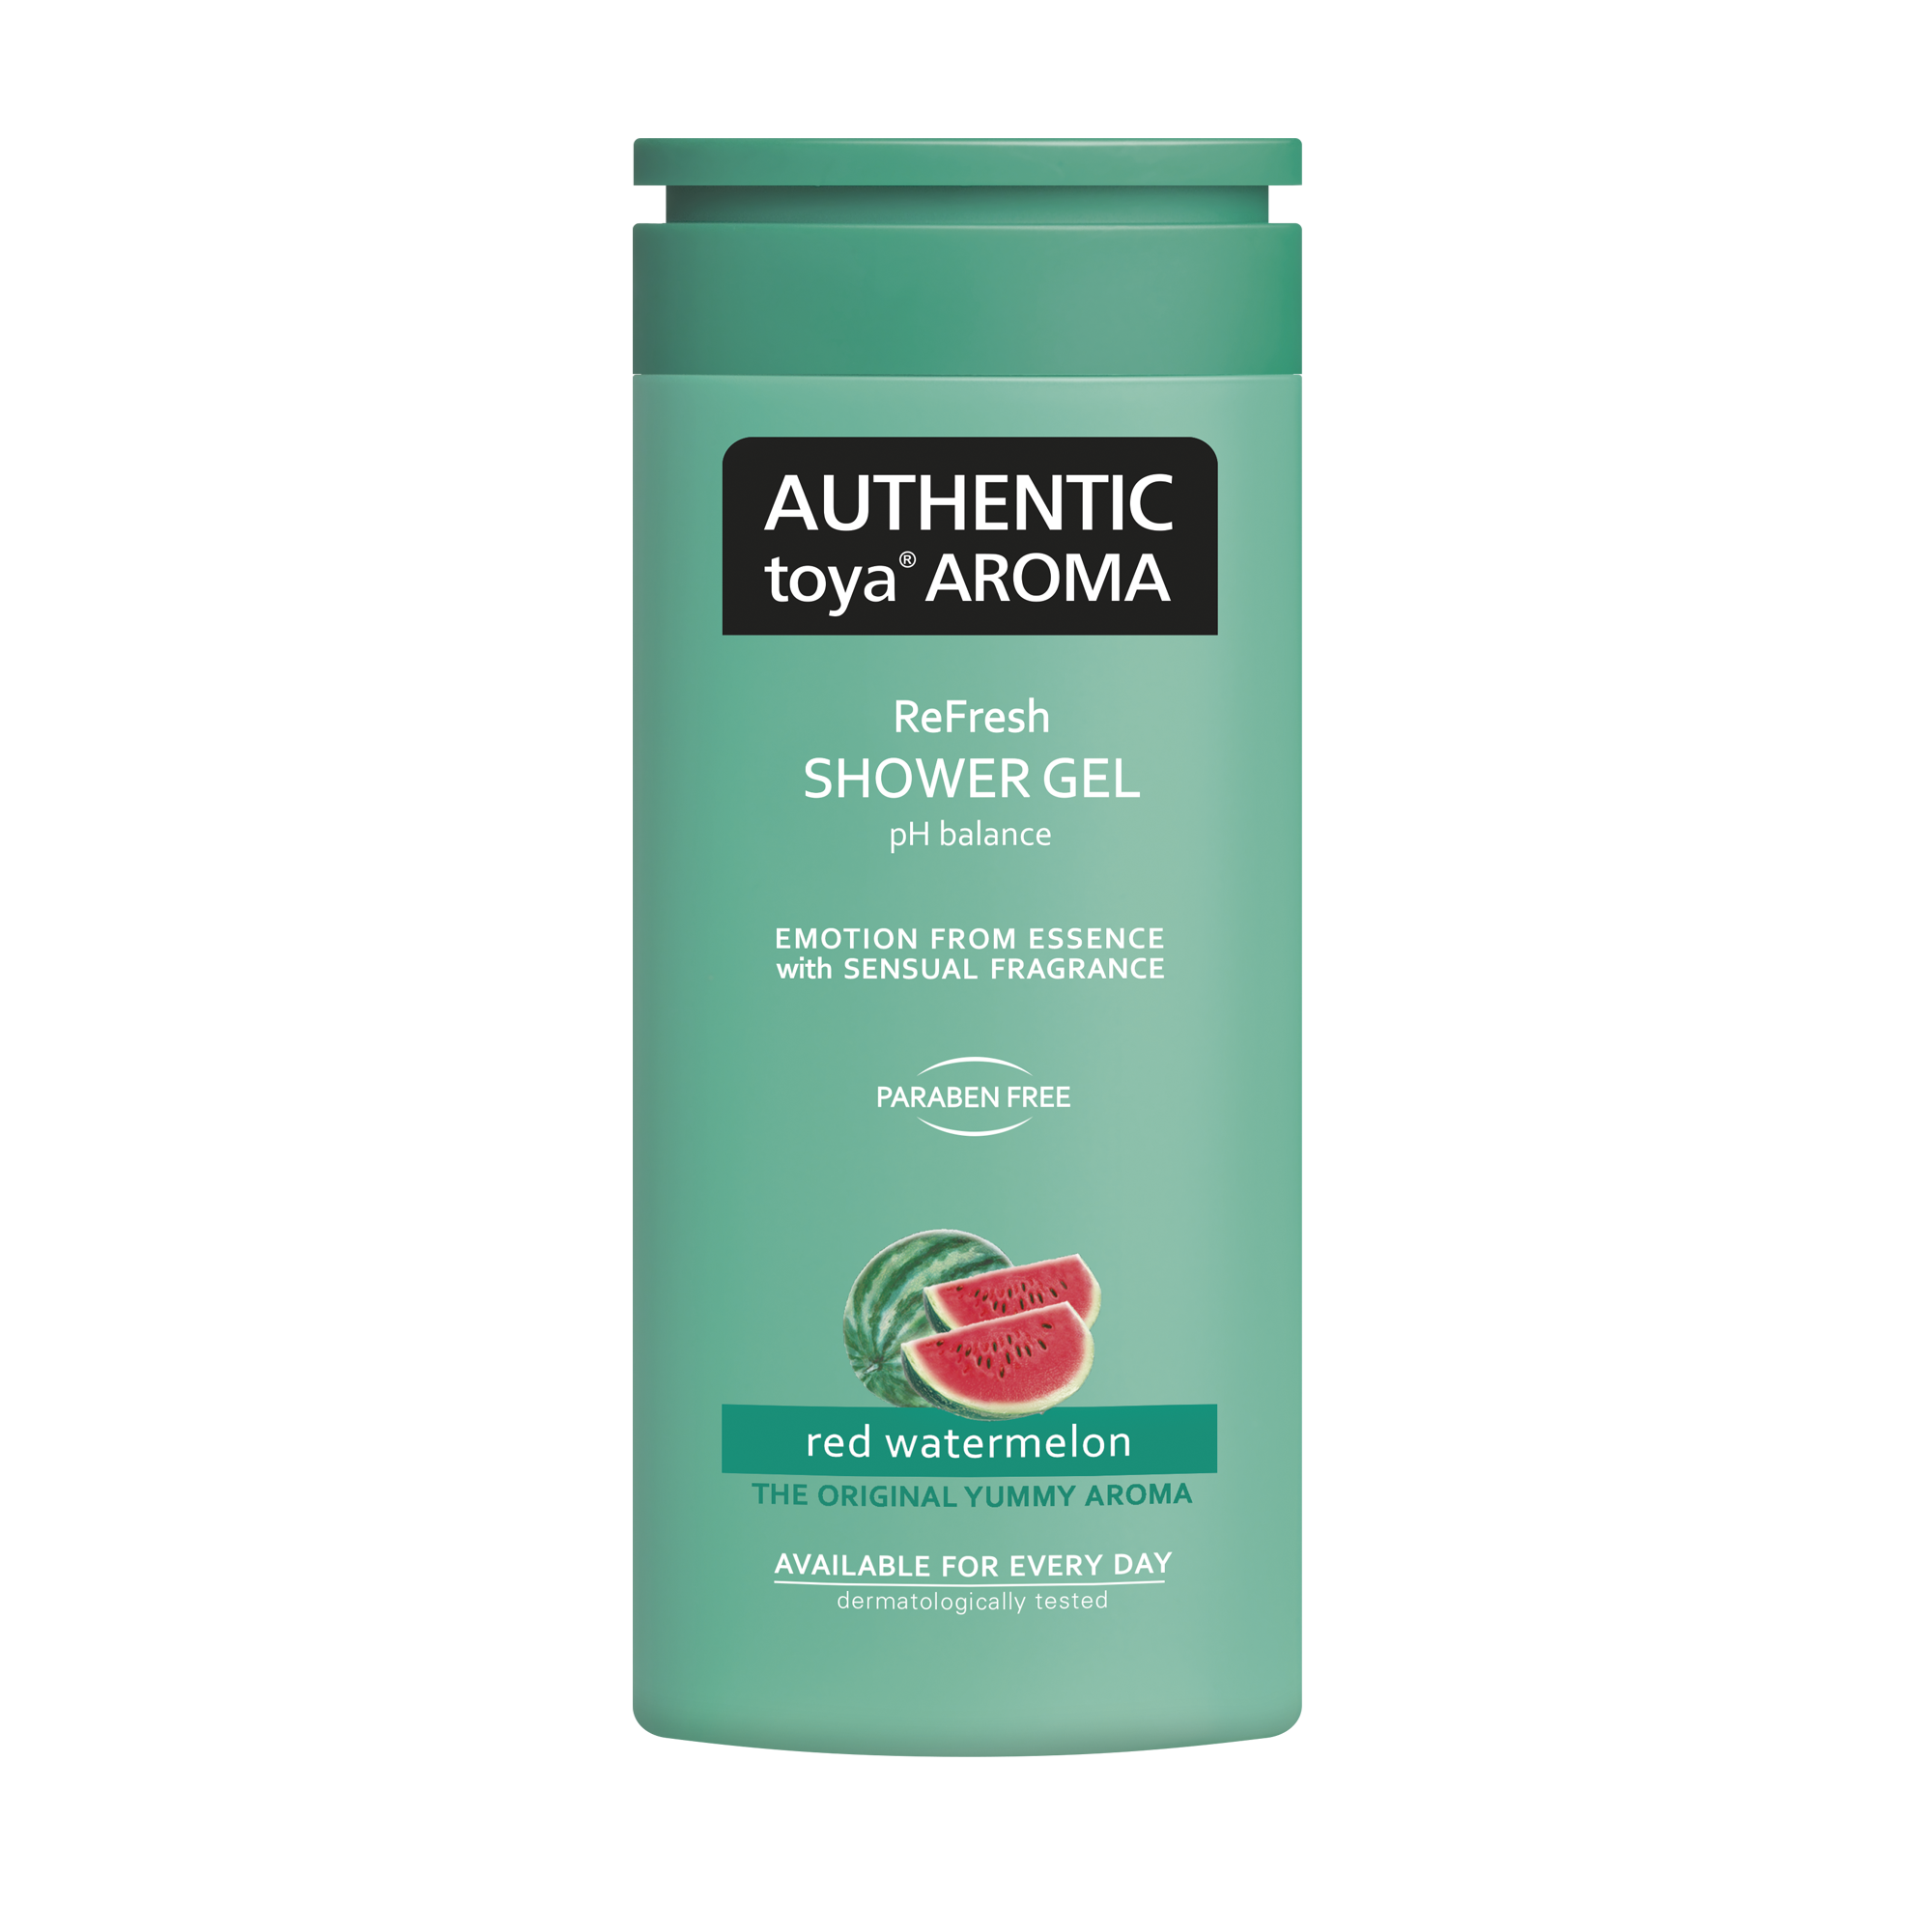 Authentic-toya-aroma-red-watermelon_1